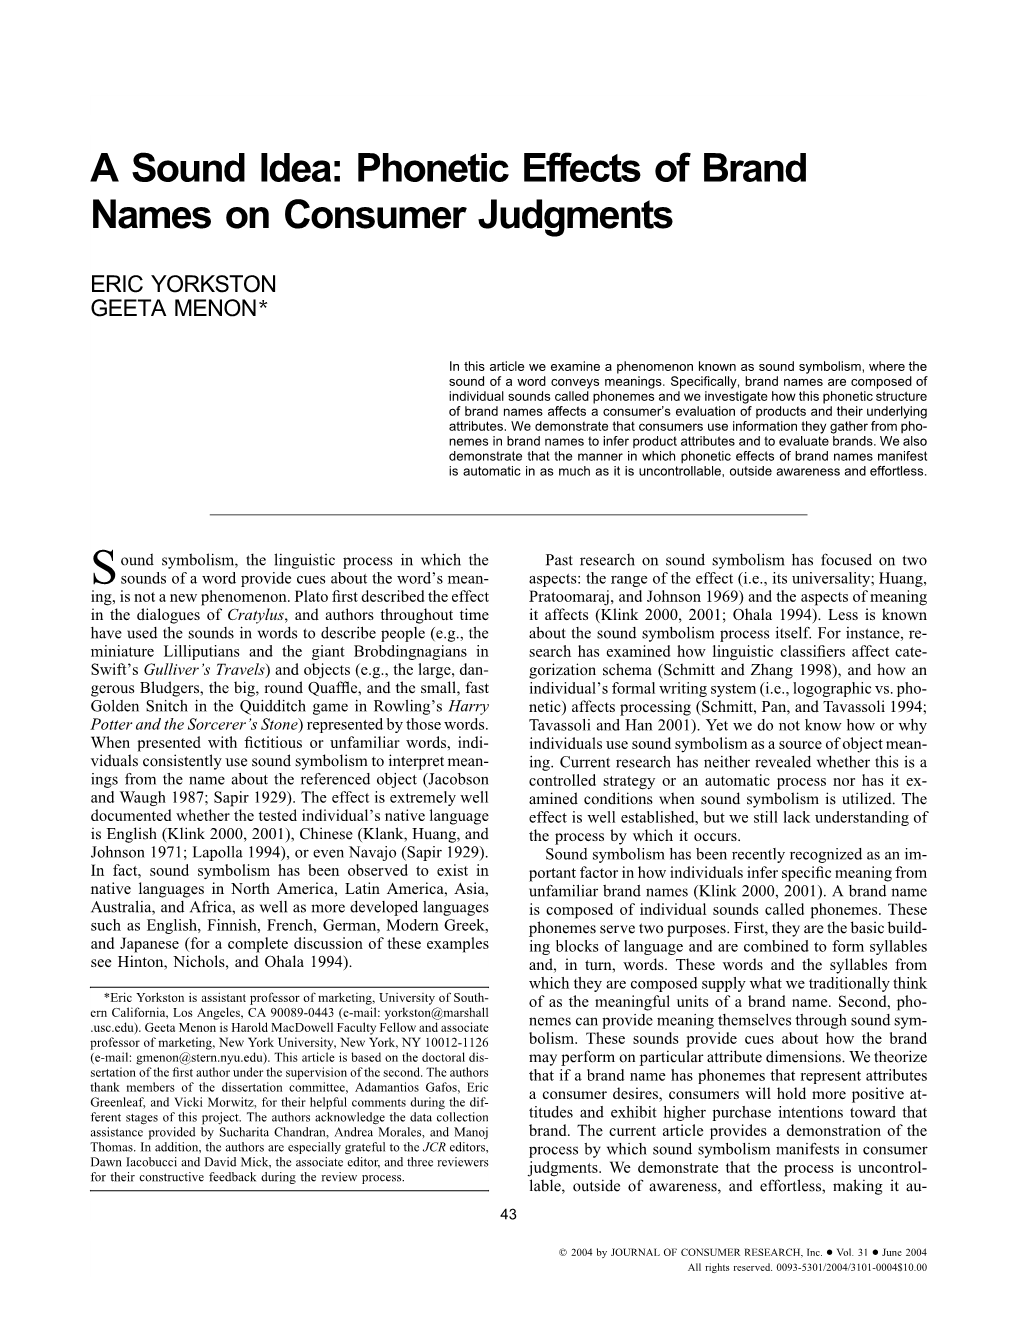 A Sound Idea: Phonetic Effects of Brand Names on Consumer Judgments